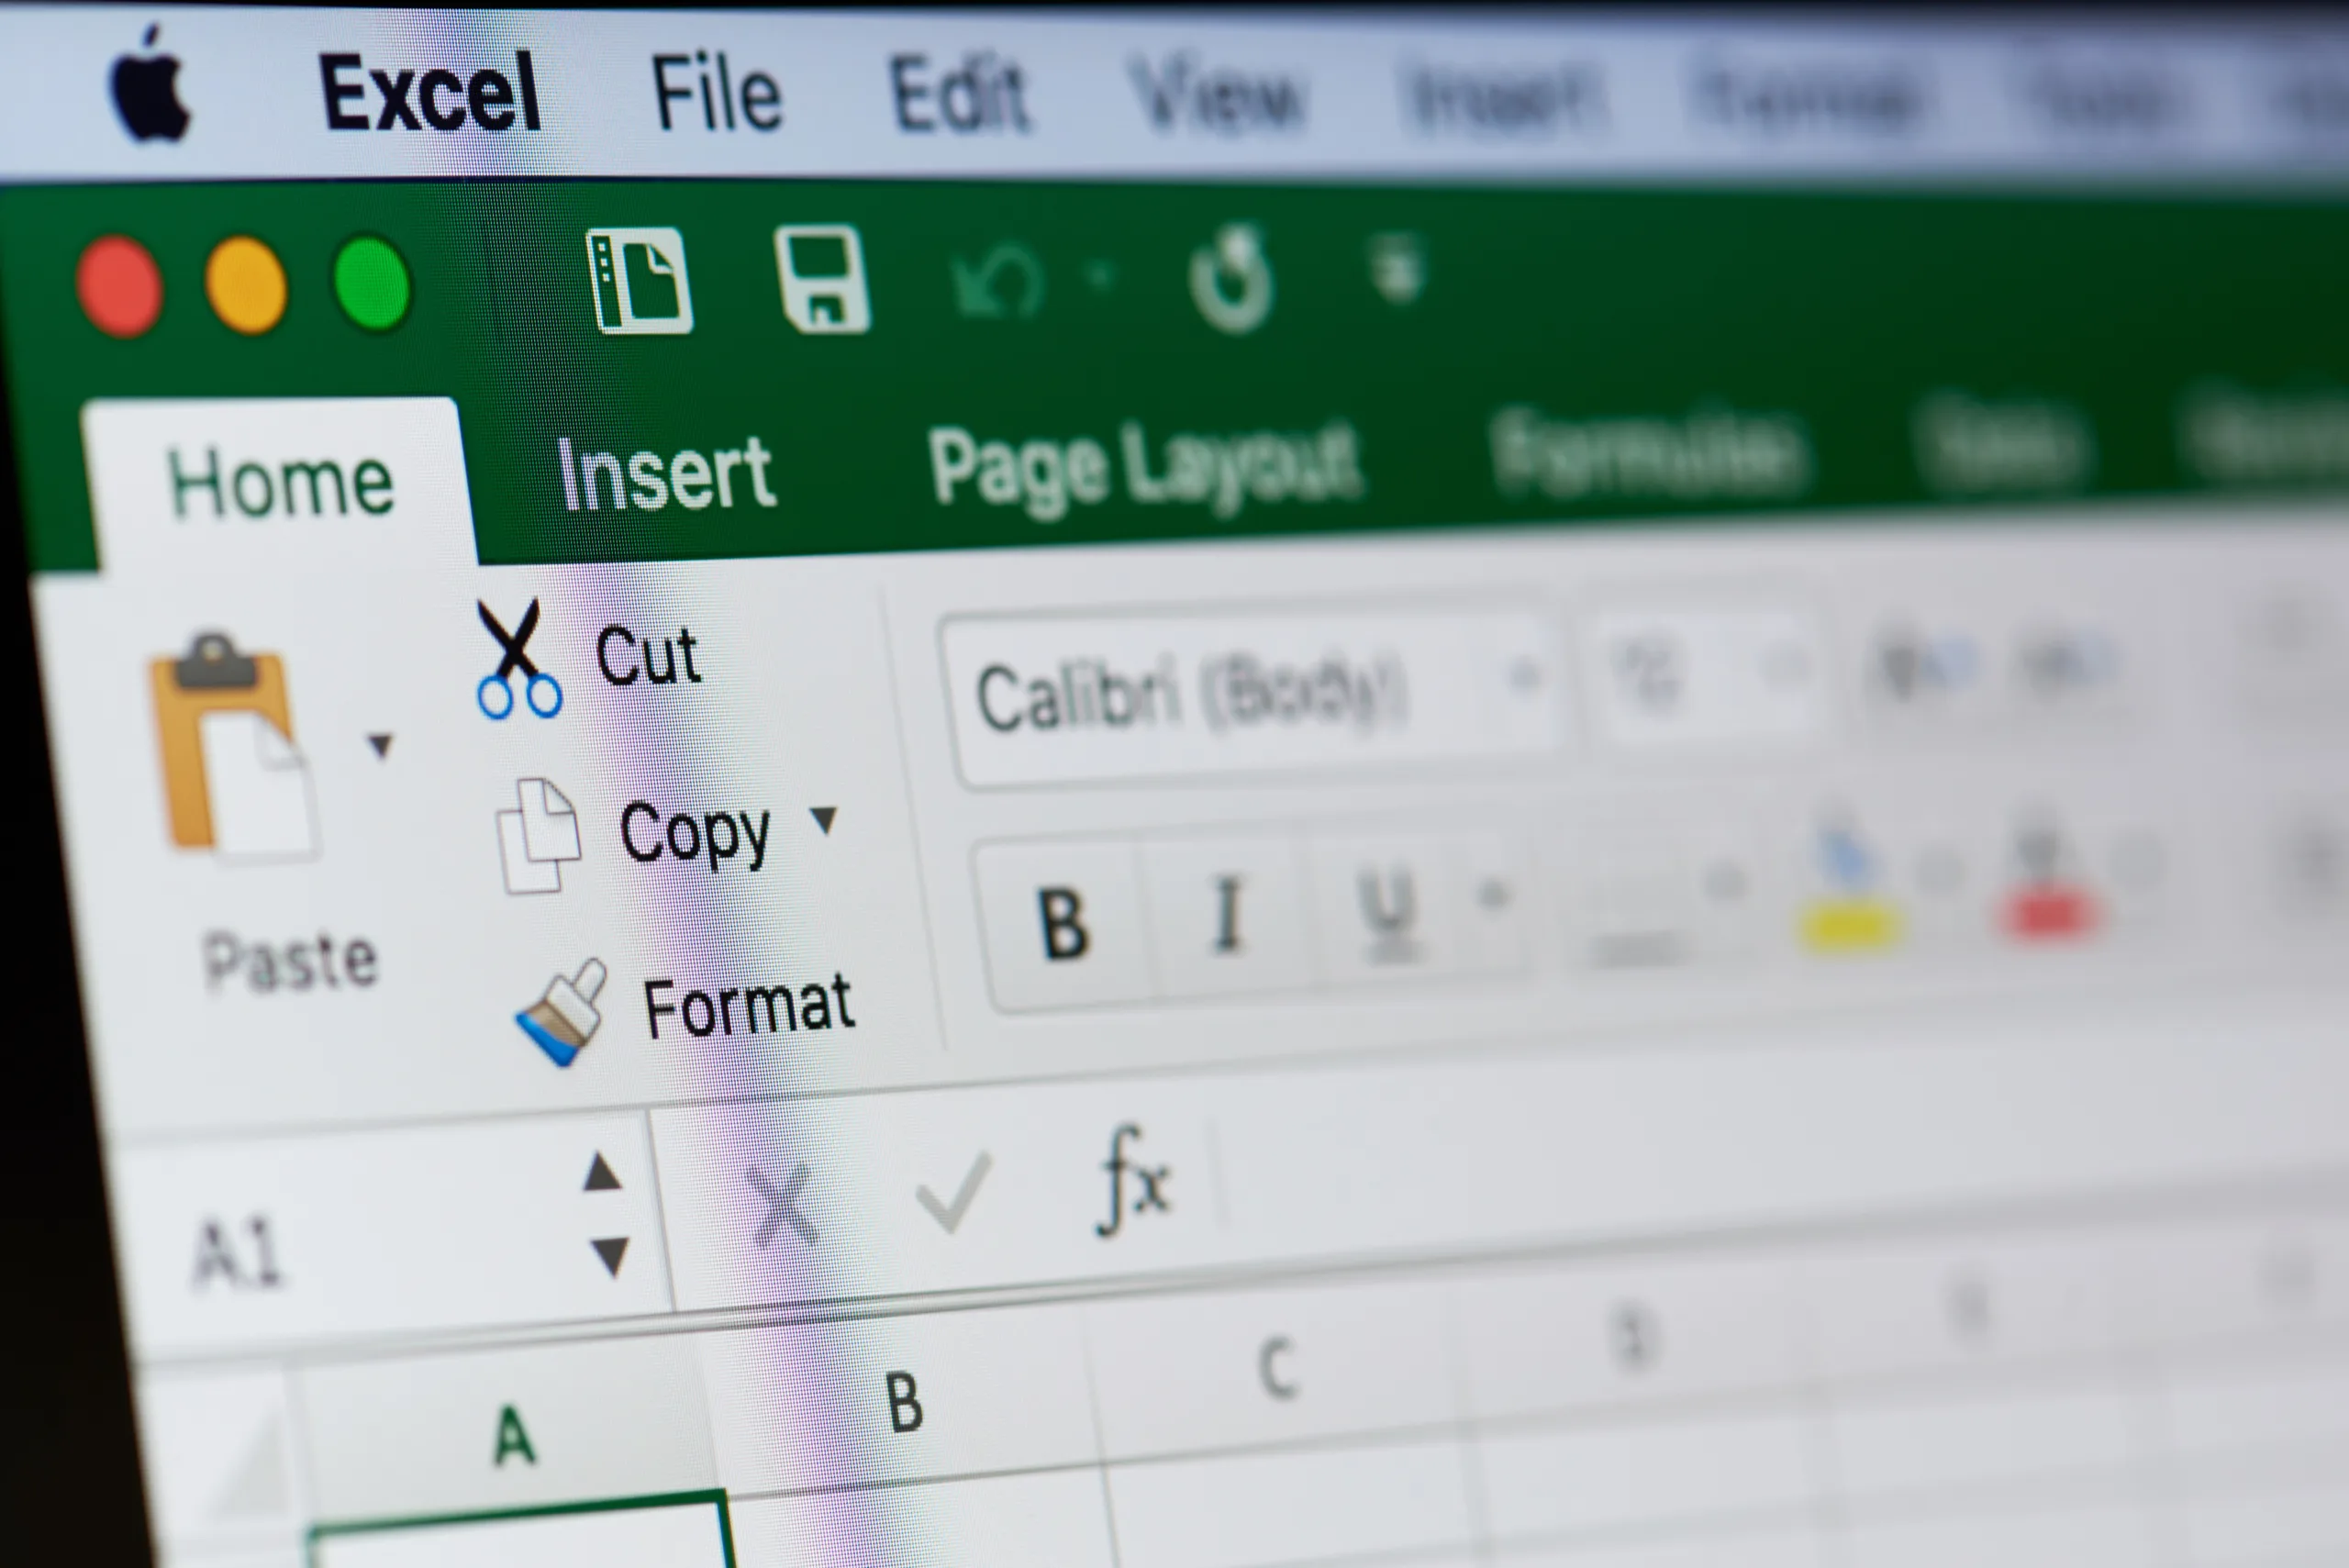 Microsoft Excel toolbar, focusing on the 'Insert' tab, indicative of a user working within the program.